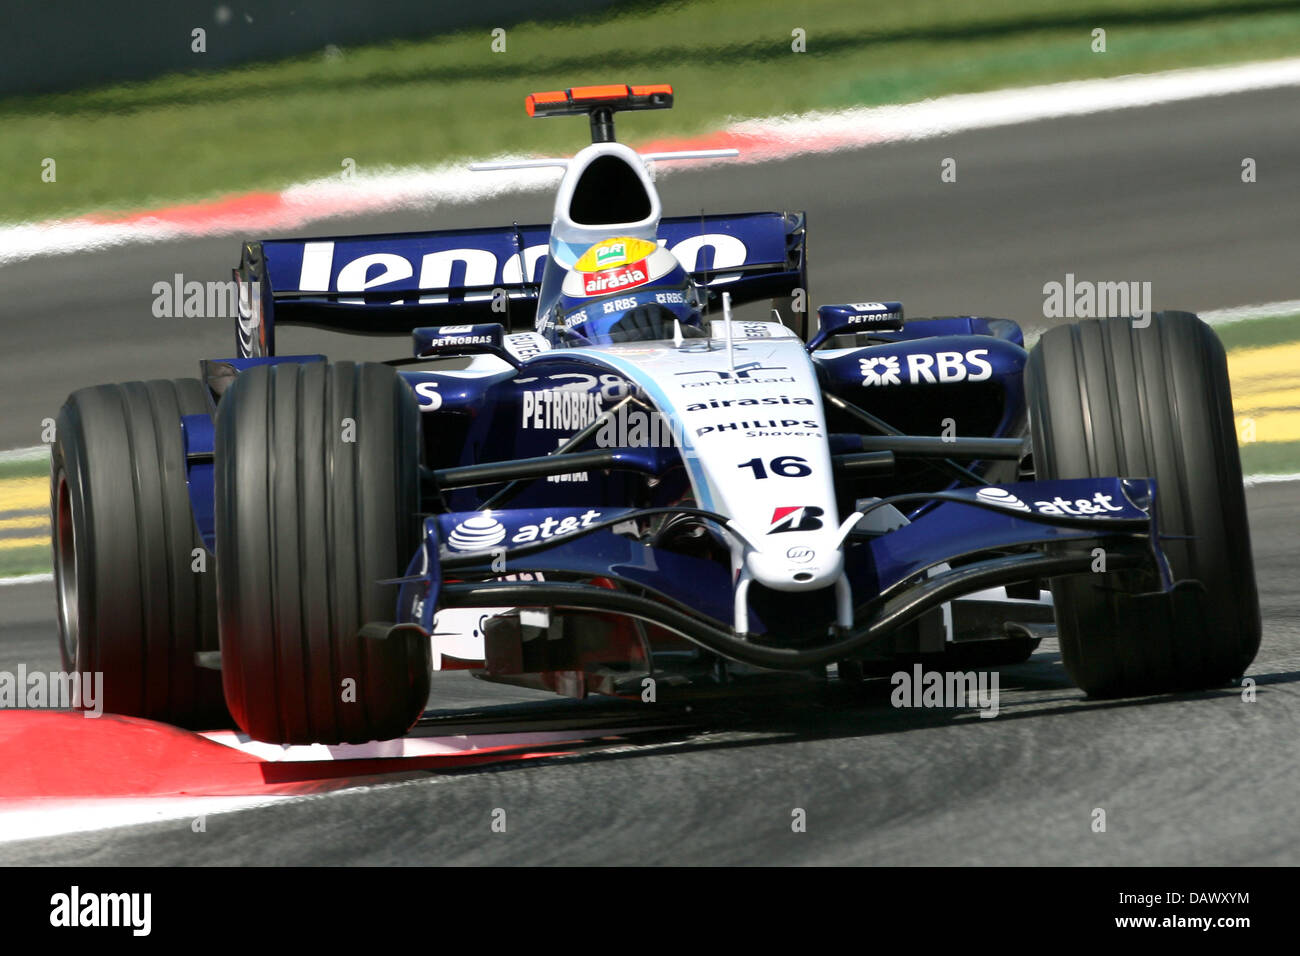 German Formula One pilot Nico Rosberg of Williams steers his car celebrates in the qualifying session at the Circuit de Catalunya race track near Barcelona, Spain, 12 May 2007. The 2007 Formula 1 Grand Prix of Spain takes place on 13 May. Photo: CARMEN JASPERSEN Stock Photo